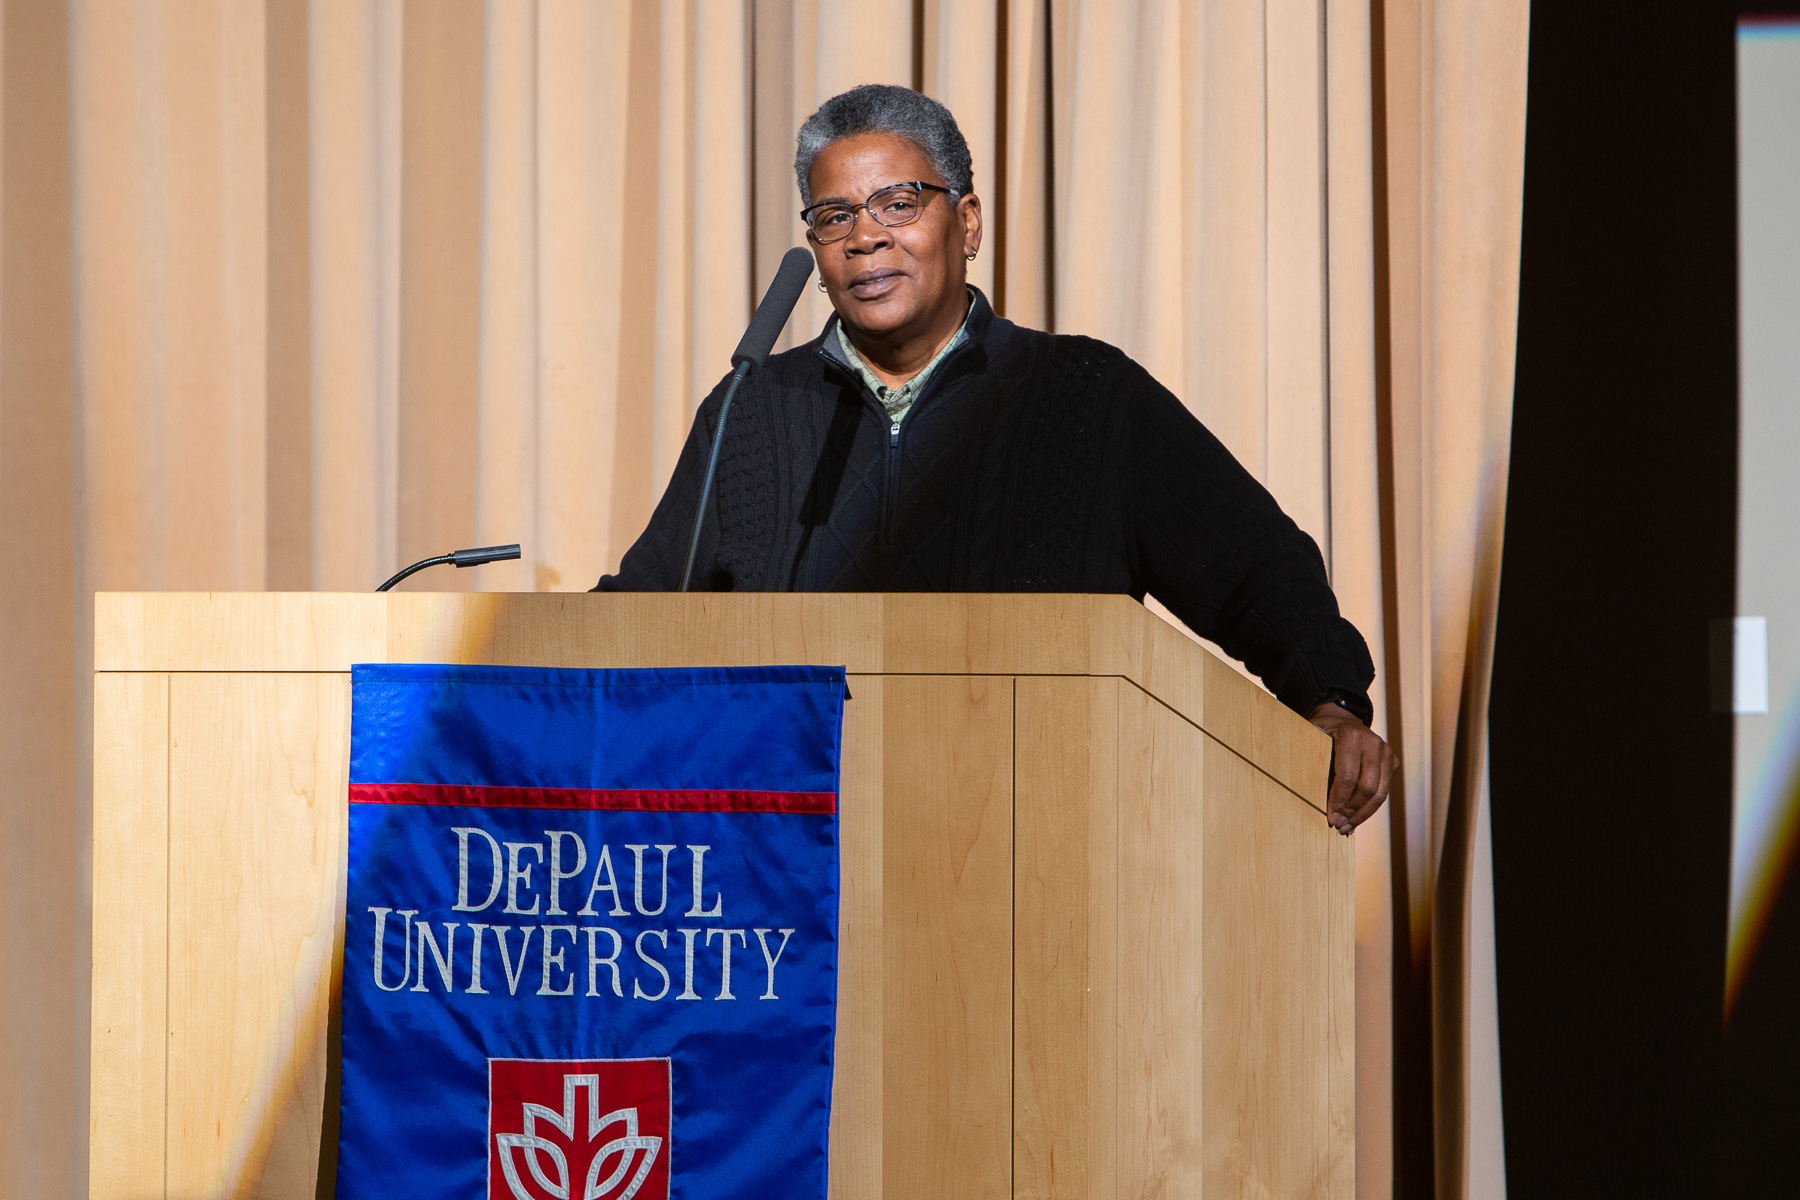 Carolyn Ross, CEO of All Chicago, offers remarks about the issue of housing insecurity in the city of Chicago. (DePaul University/Randall Spriggs)